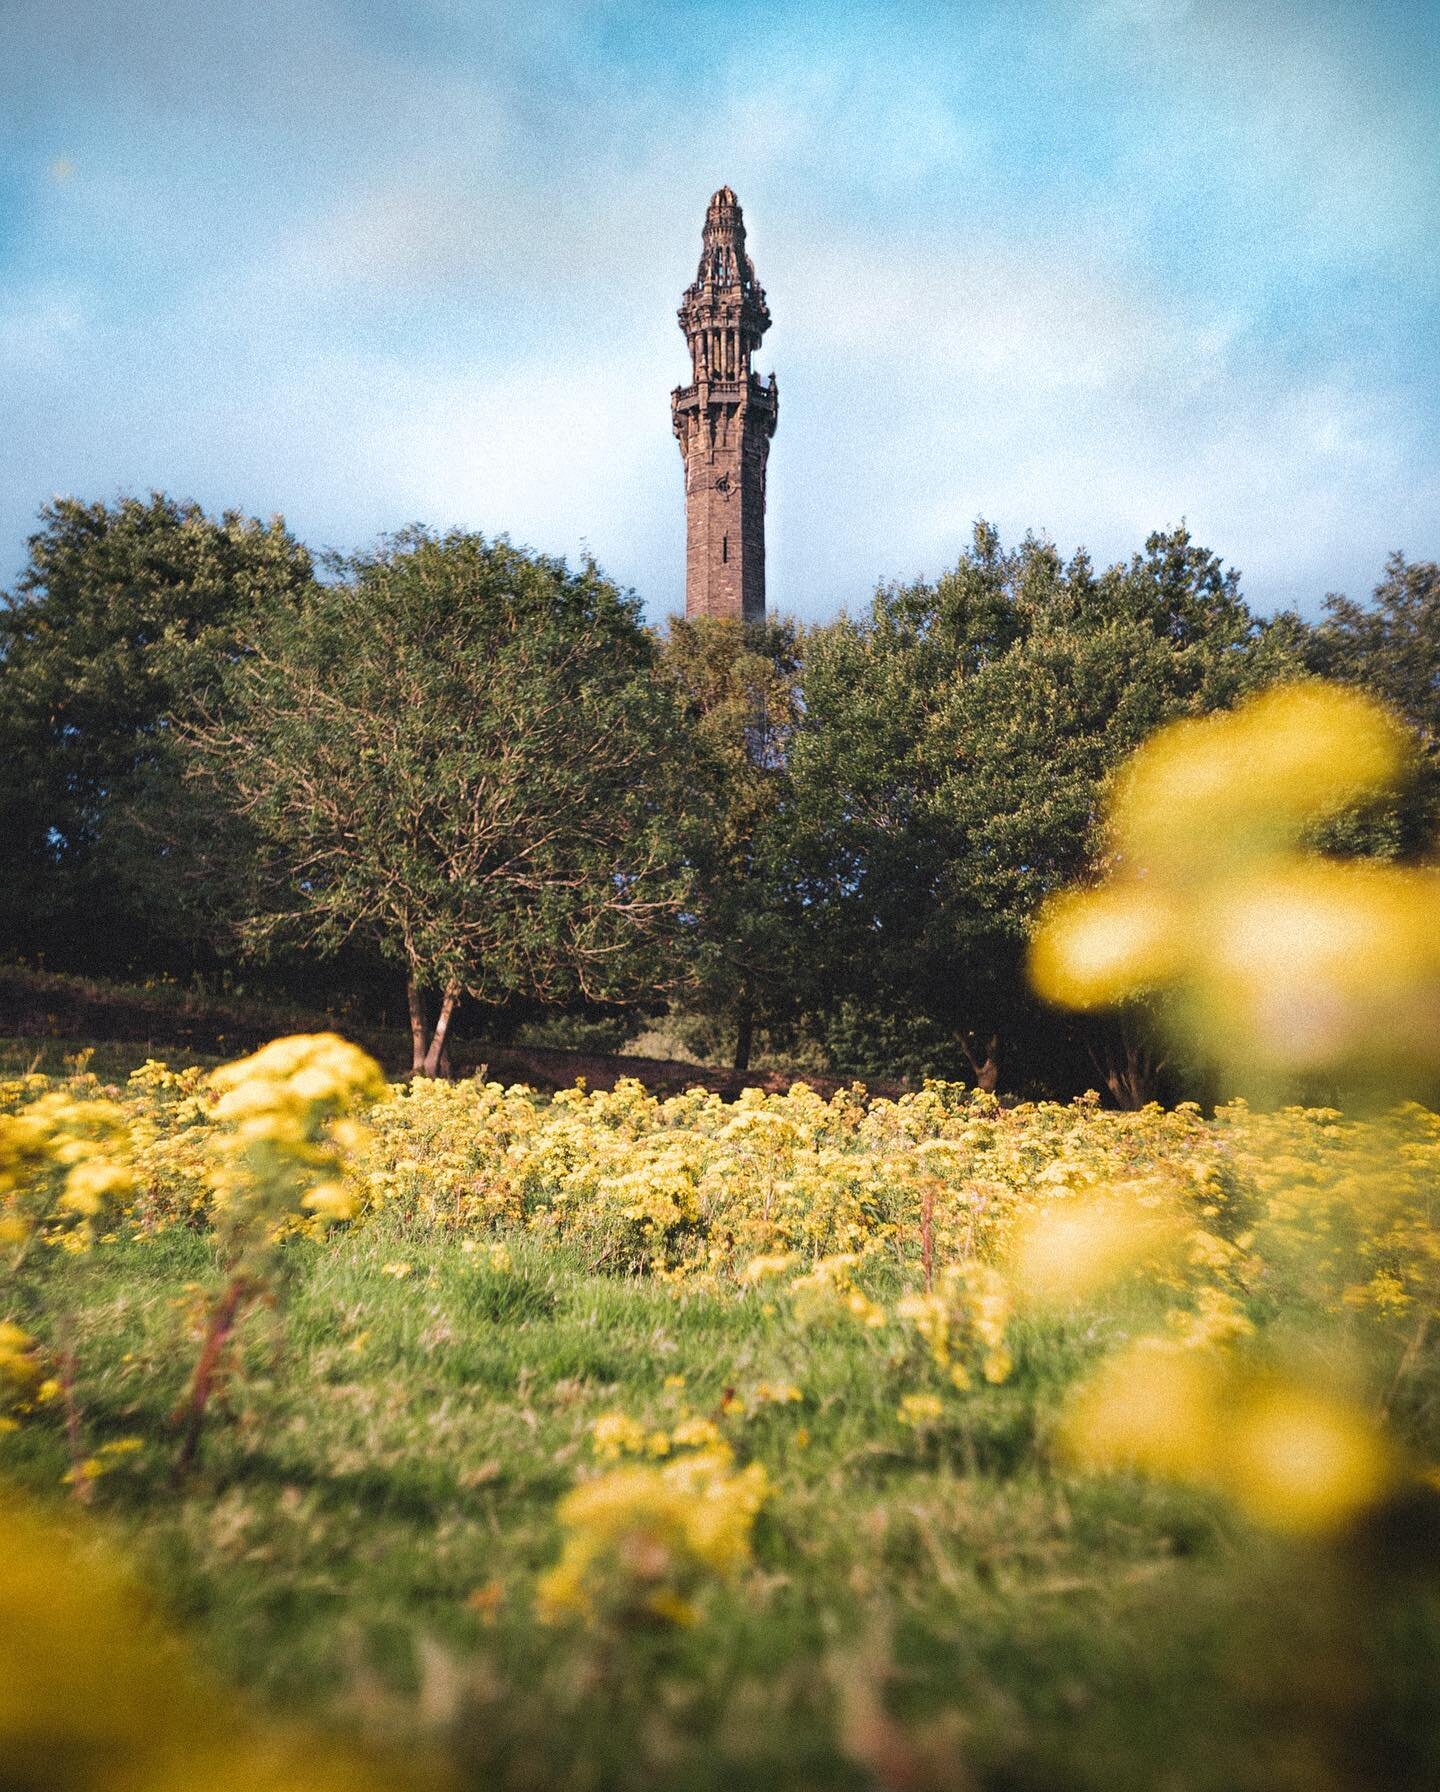 Imagine building a 275ft tower just so you could piss off your Tory MP neighbour&hellip;  Well, believe it or not this is kinda the story behind the famous Wainhouse Tower of Halifax.  Originally the structure had been commissioned in 1871 by the ecc